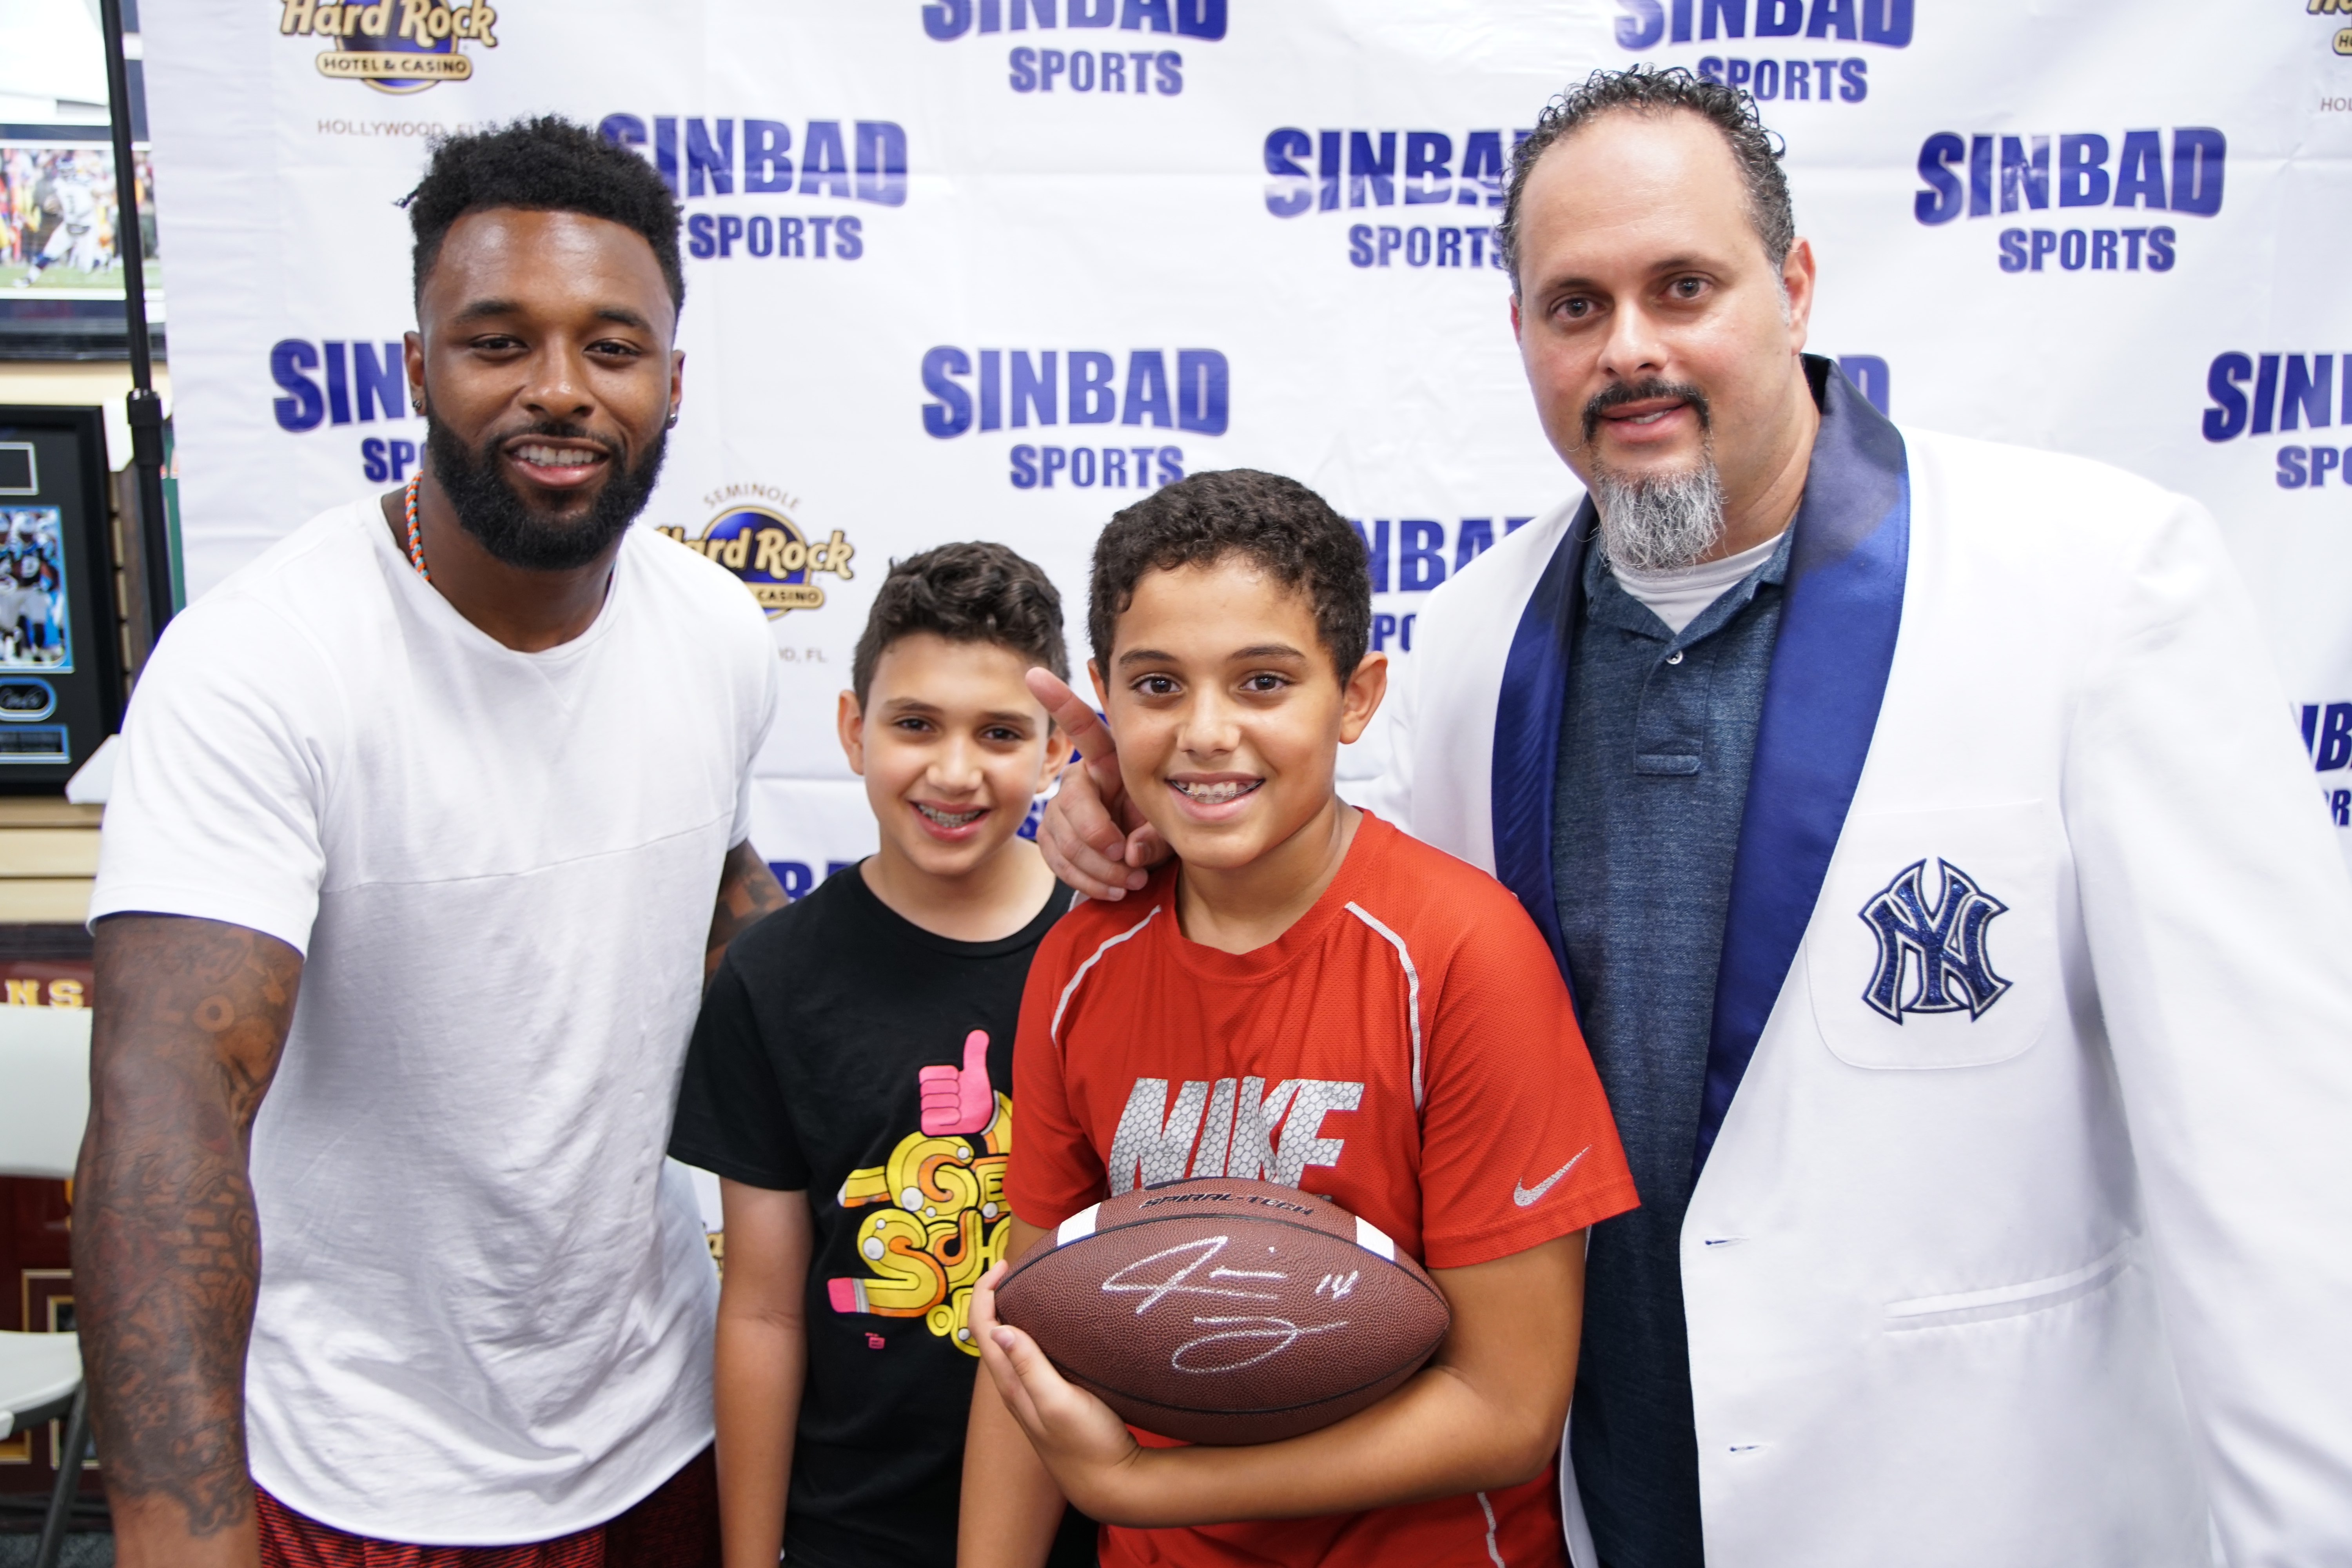 jarvis landry with sinbad family at autograph event in Miami